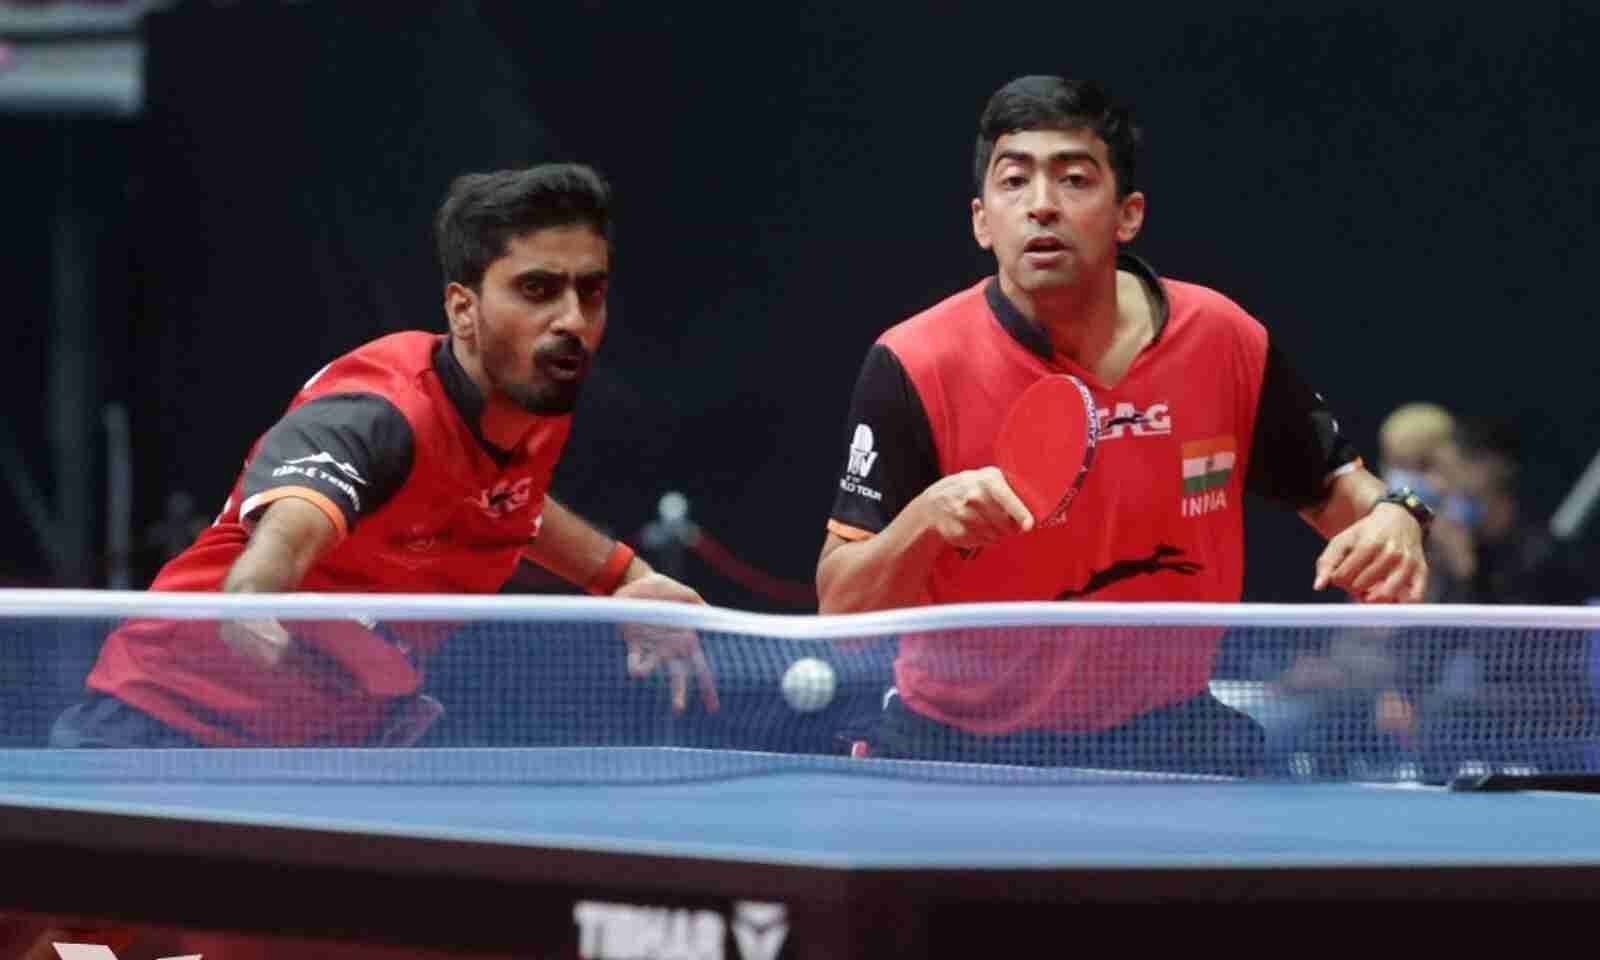 Sathiyan G and Harmeet Desai, the new doubles pairing for India. (PC: TTFI)